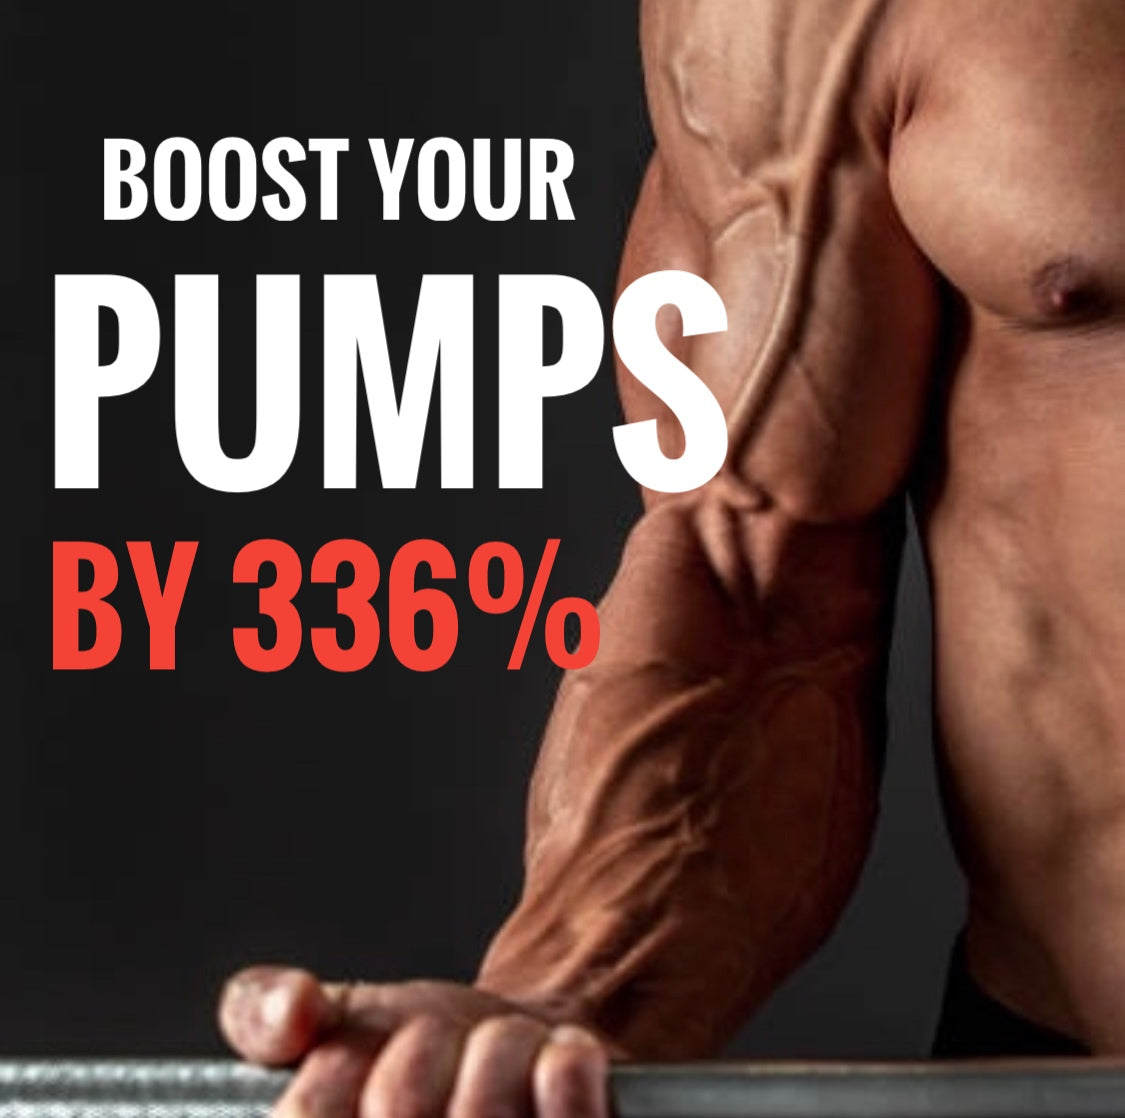 How To Boost Your Pumps By 336%